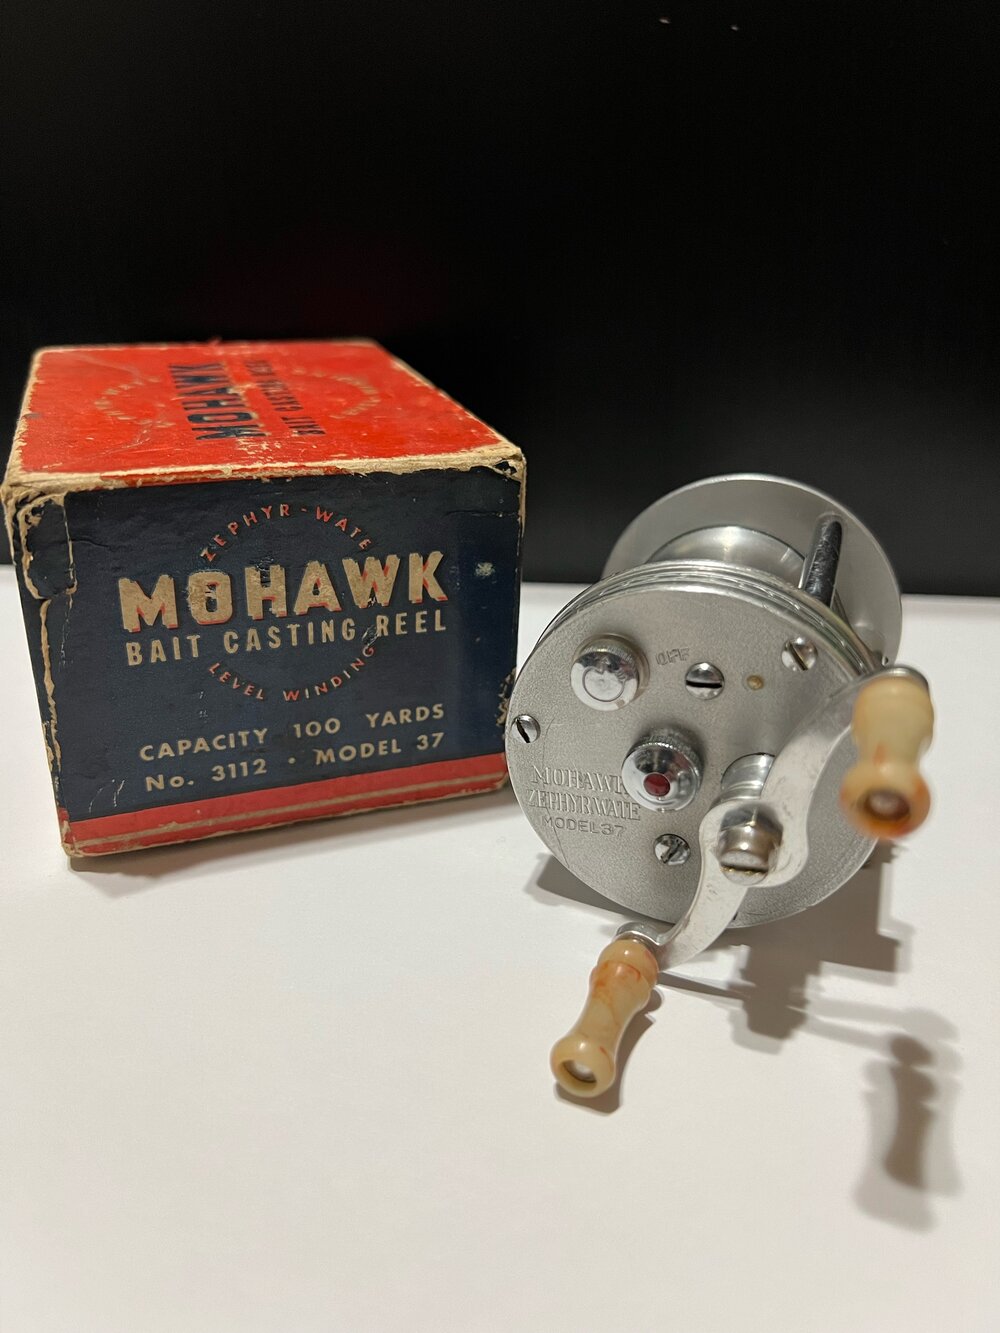 Ocean City MOHAWK ZEPHYR-WATE Model 37 Trade Reel for Sears Roebuck & Co.  Aluminum Level Wind Jeweled with Original Box Circa-1938 — VINTAGE FISHING